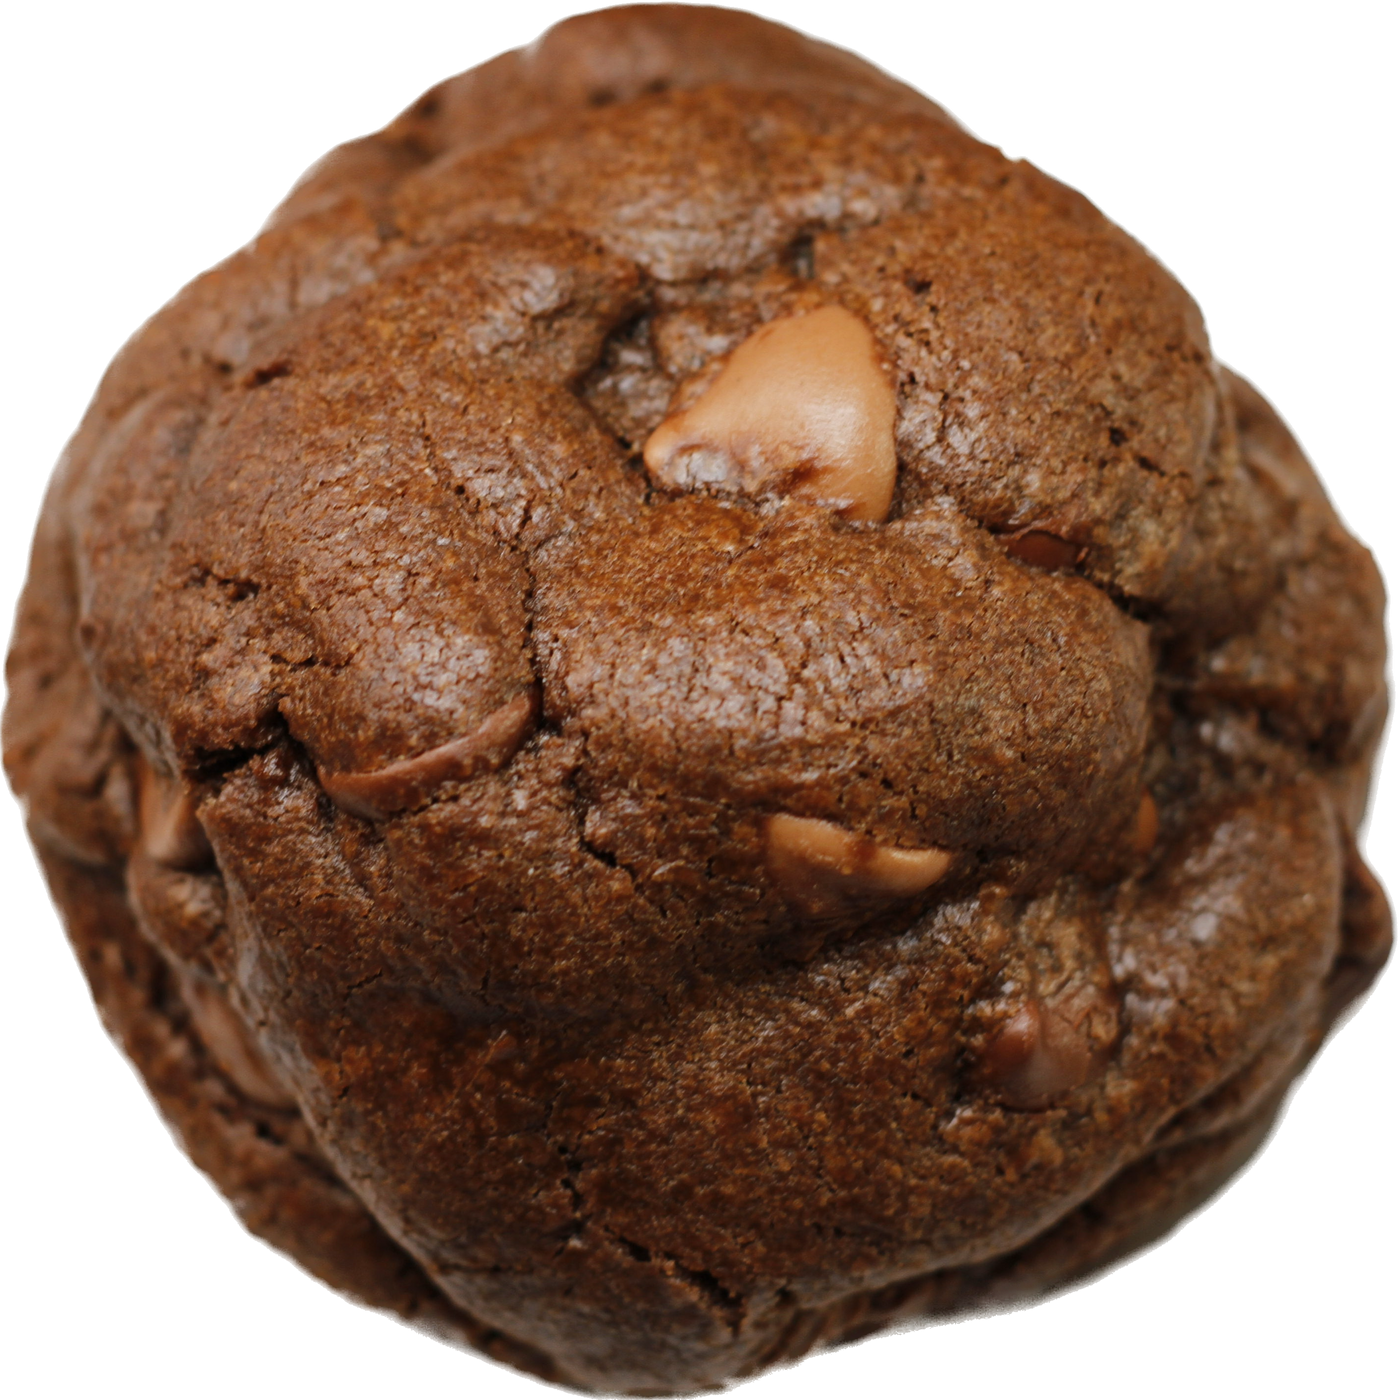 A triple chocolate cookie with chunks of dark, milk, and white chocolate scattered throughout the dough and melting on top. The cookie is slightly crispy on the edges and soft in the center, with a rich chocolate flavor that is sure to satisfy any chocolate lover's cravings.